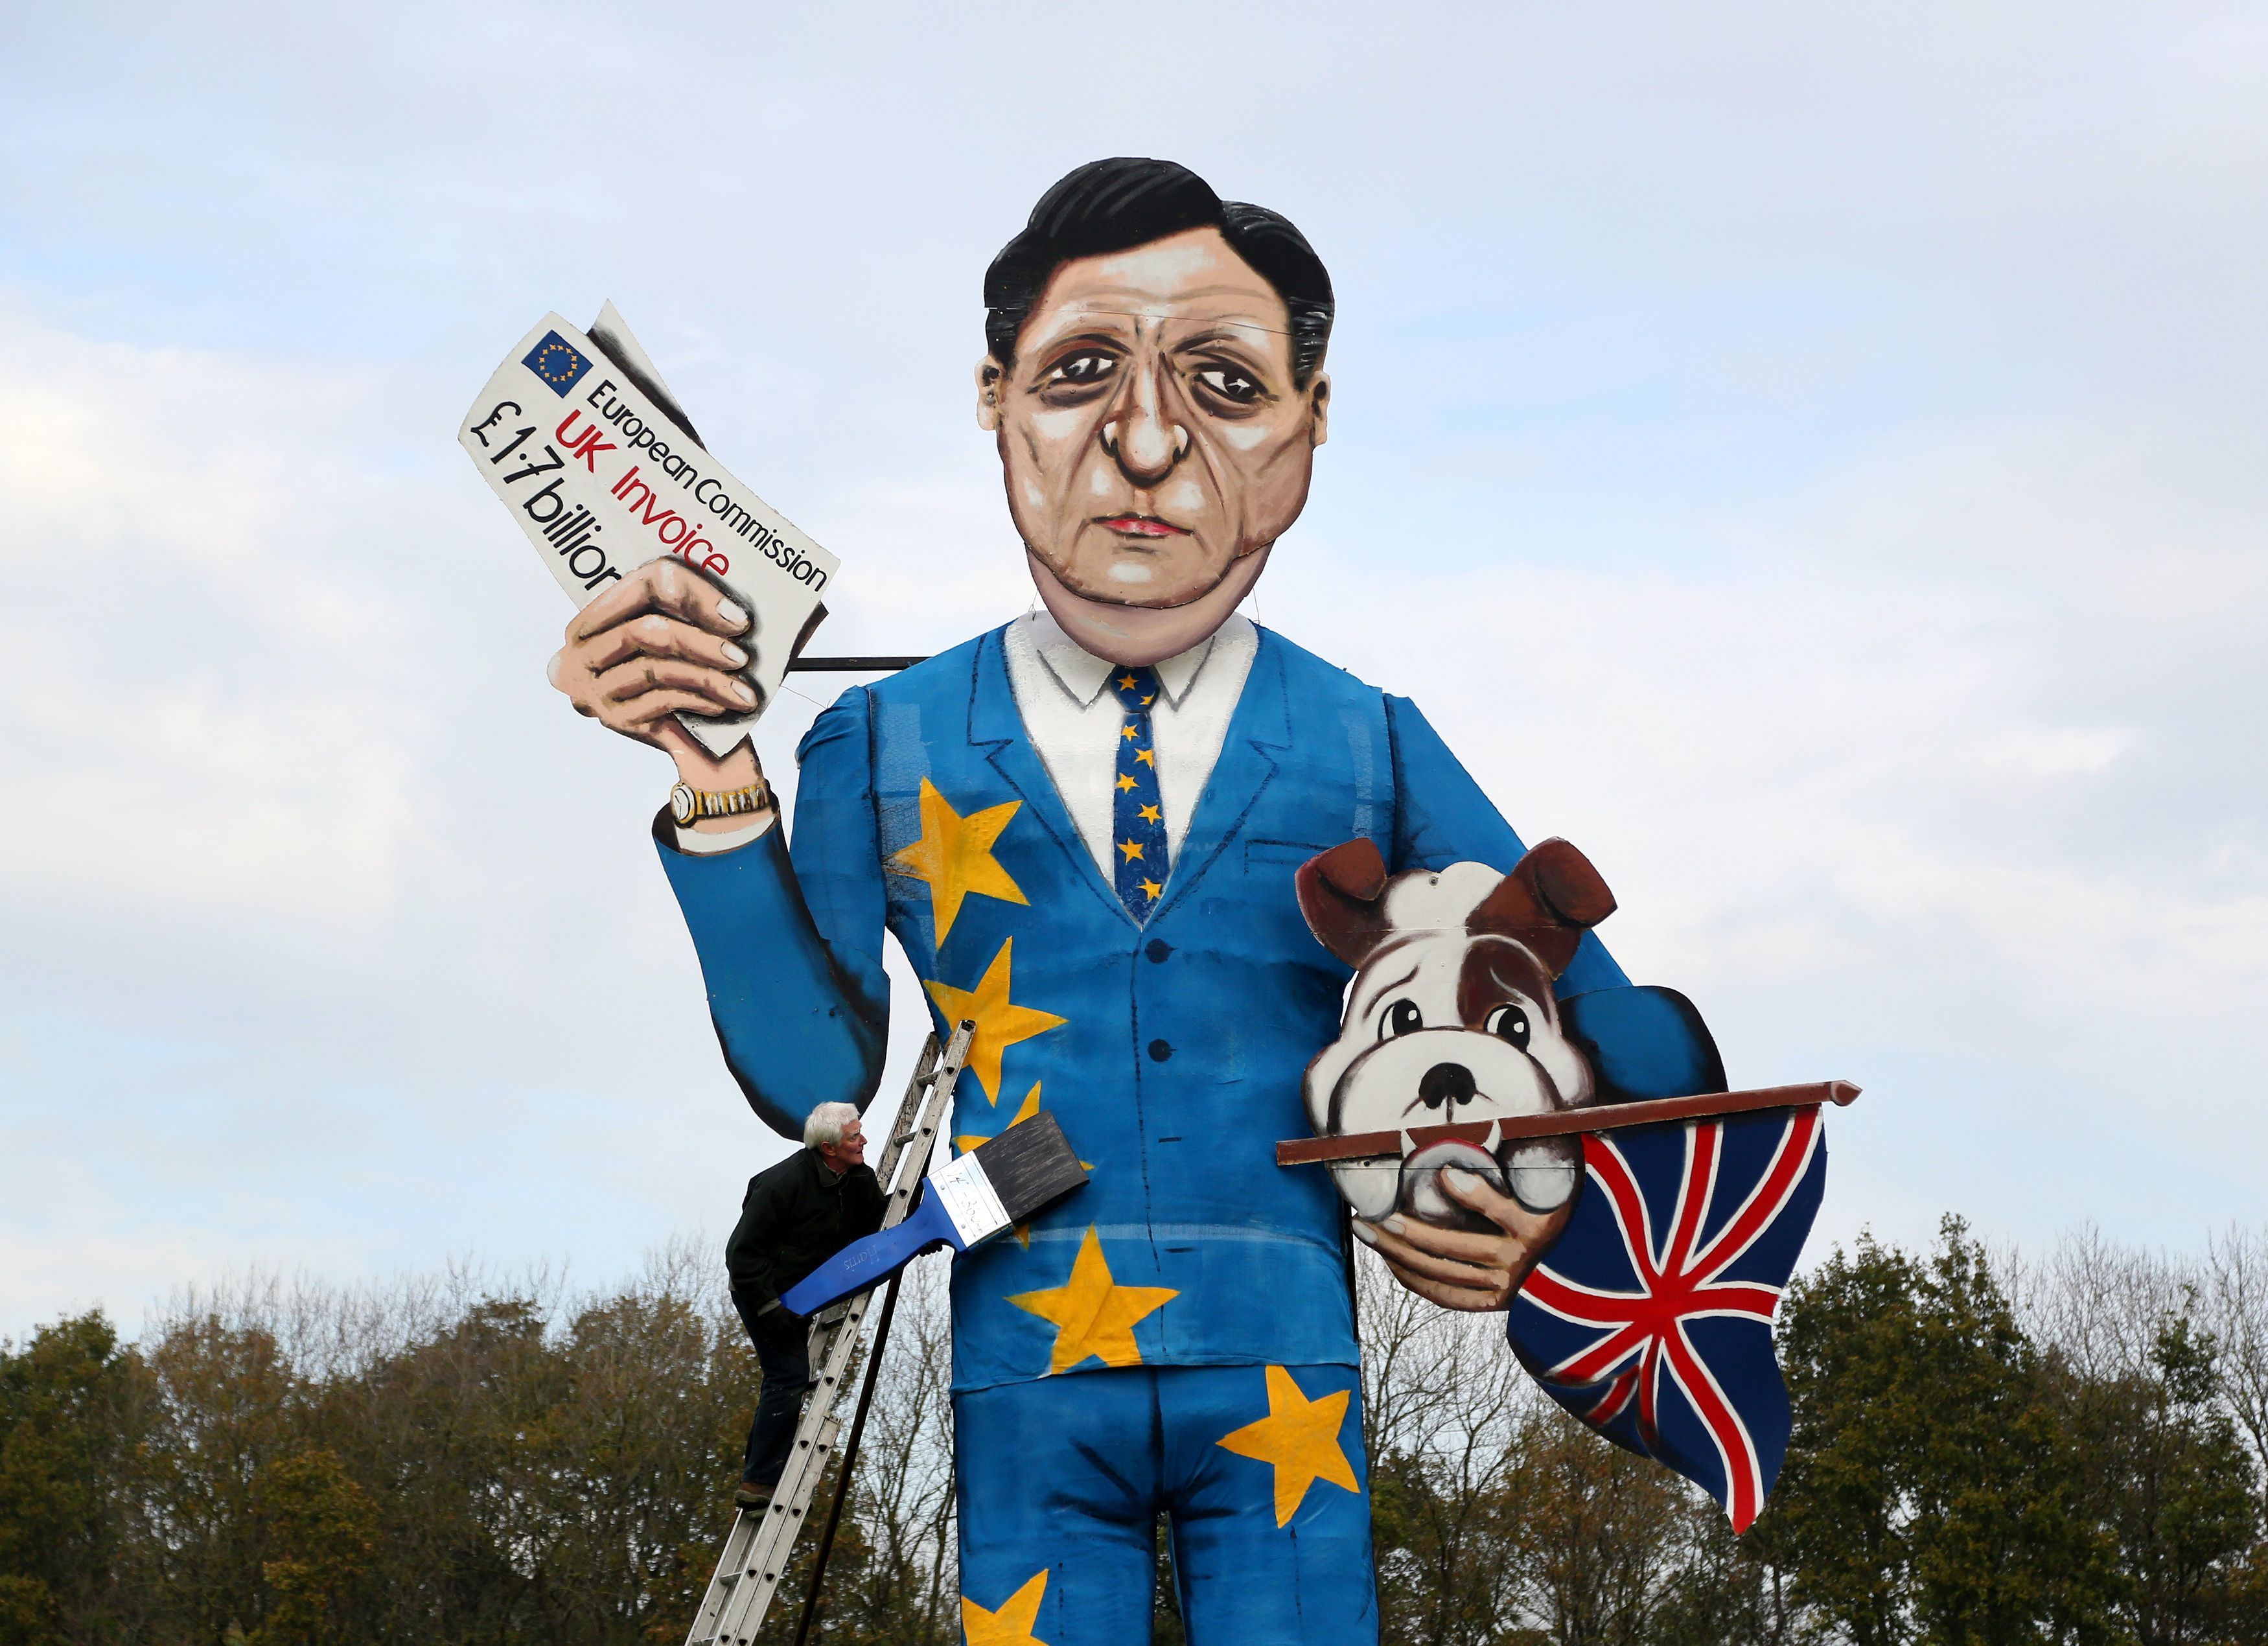 Artist Frank Shepherd puts the final touches to the 2014 Eden Bridge Bonfire Society celebrity guy which has been unveiled as Jose Manuel Barroso, the exiting President of the European Commission